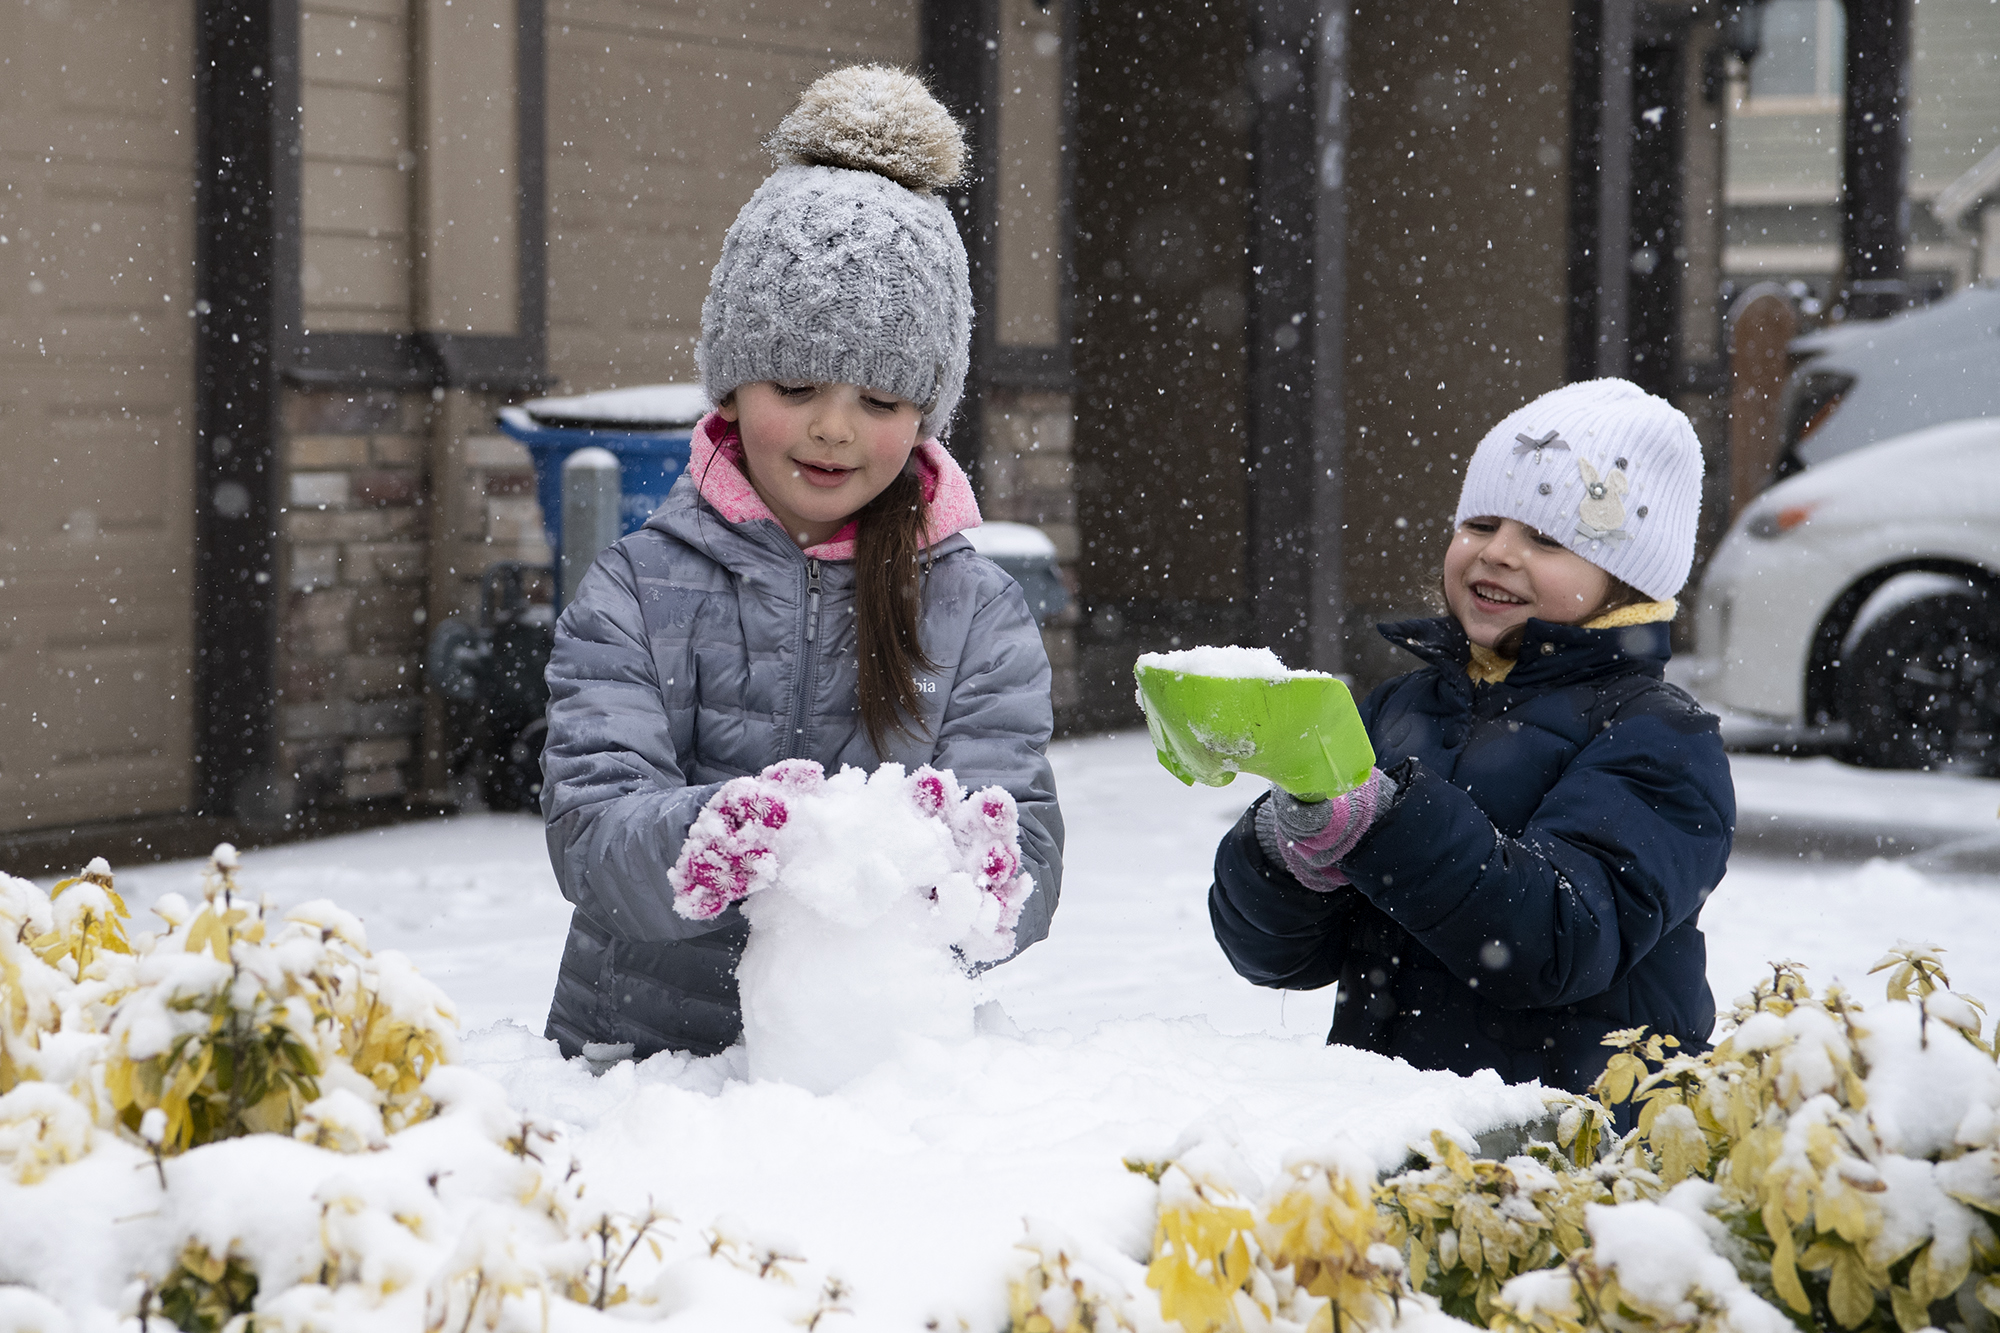 Emilya, 6, and Katerina, 5, play in the snow on Friday, February 12, in front of their home in the Minnehaha neighborhood. Snow continued to accumulate Friday morning as the winter storm persisted.